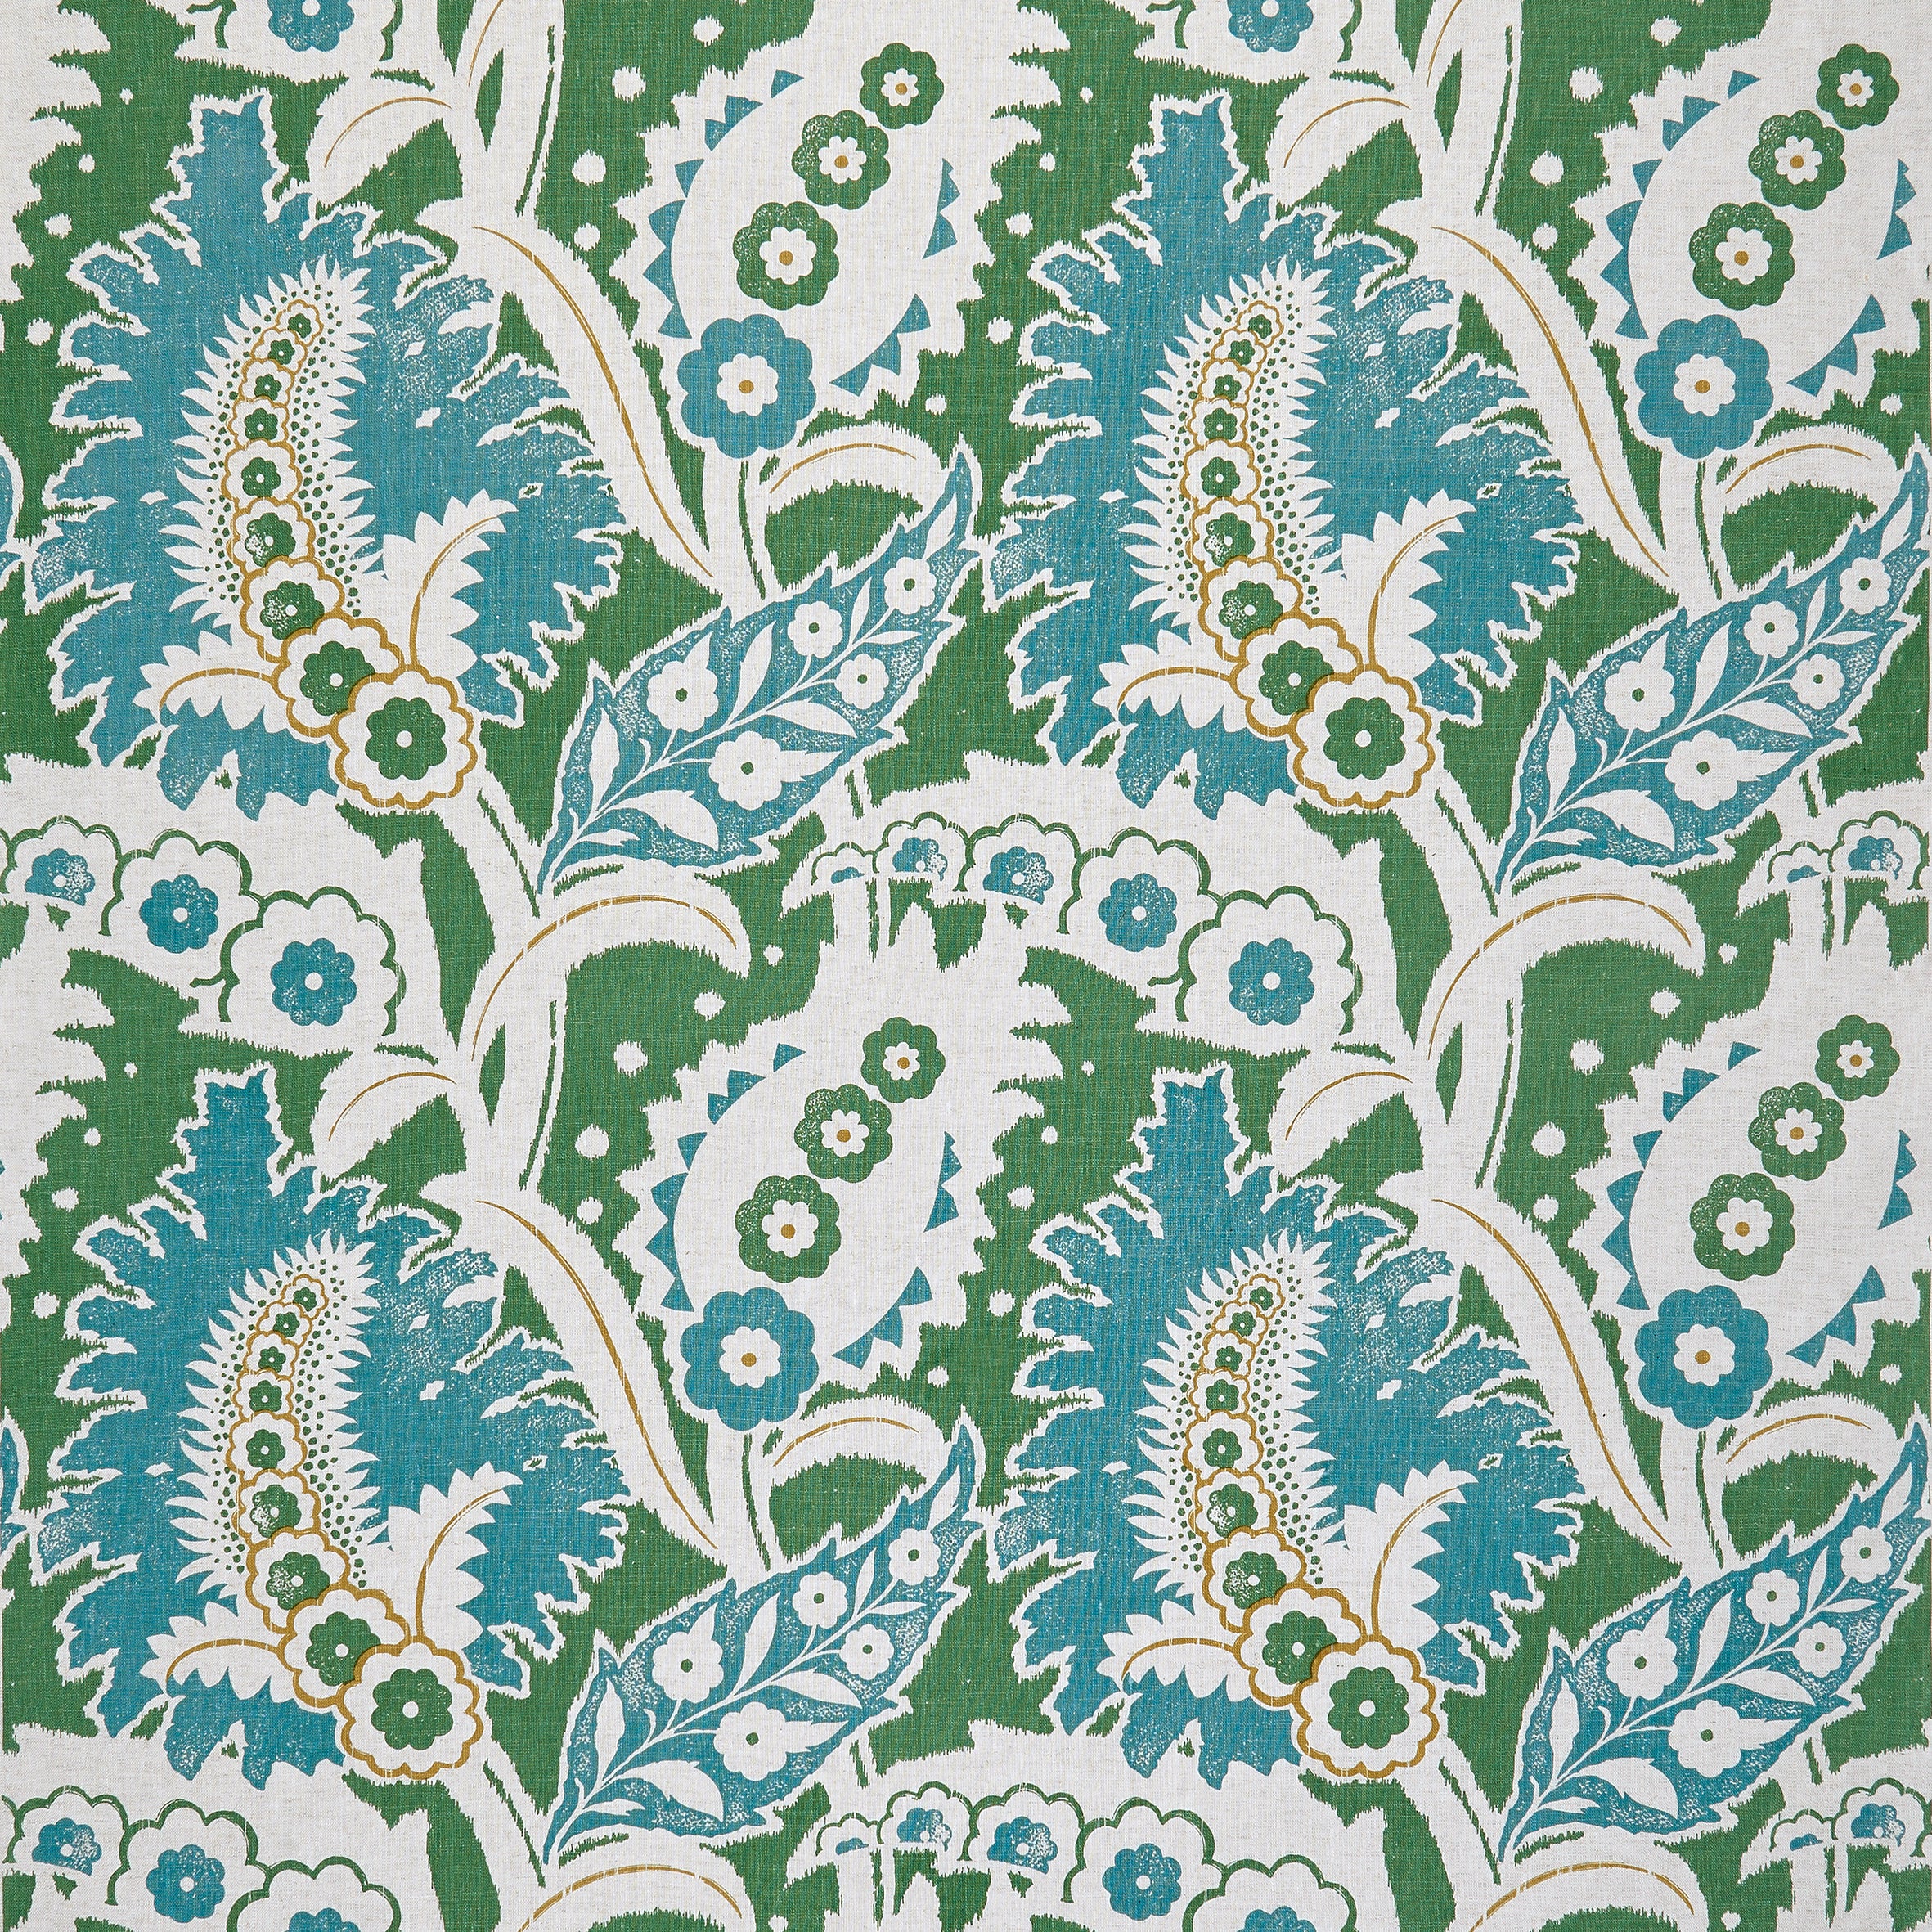 Detail of fabric in a botanical paisley print in shades of blue, white and brown on a green field.